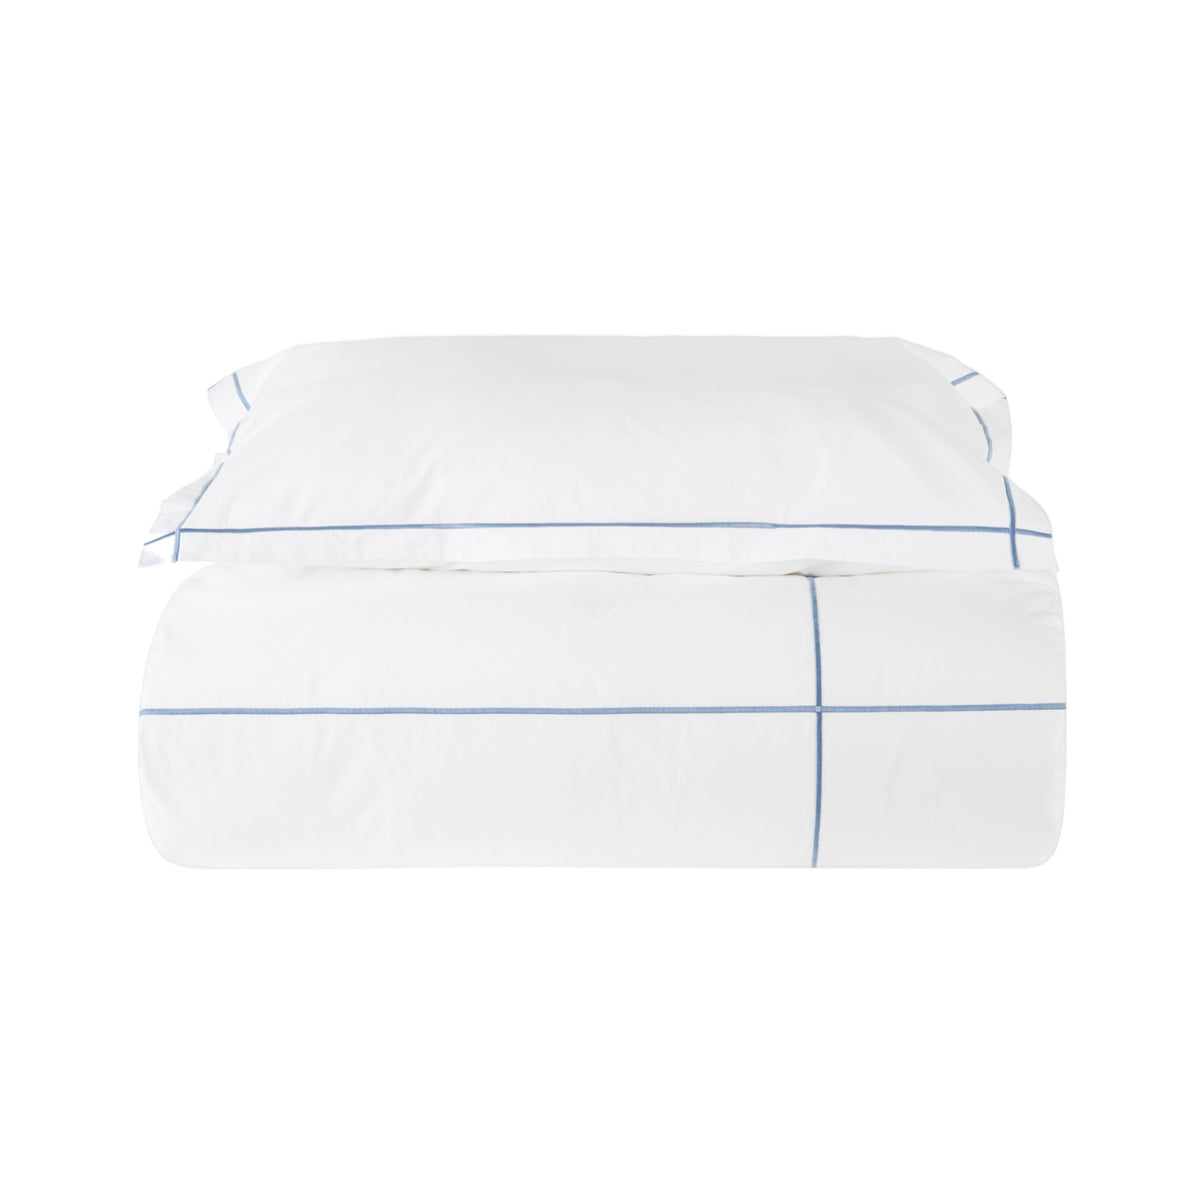 Stacked Folded BOVI Classic Hotel Bedding Duvet Sheet and Pillowcase White Blue Color